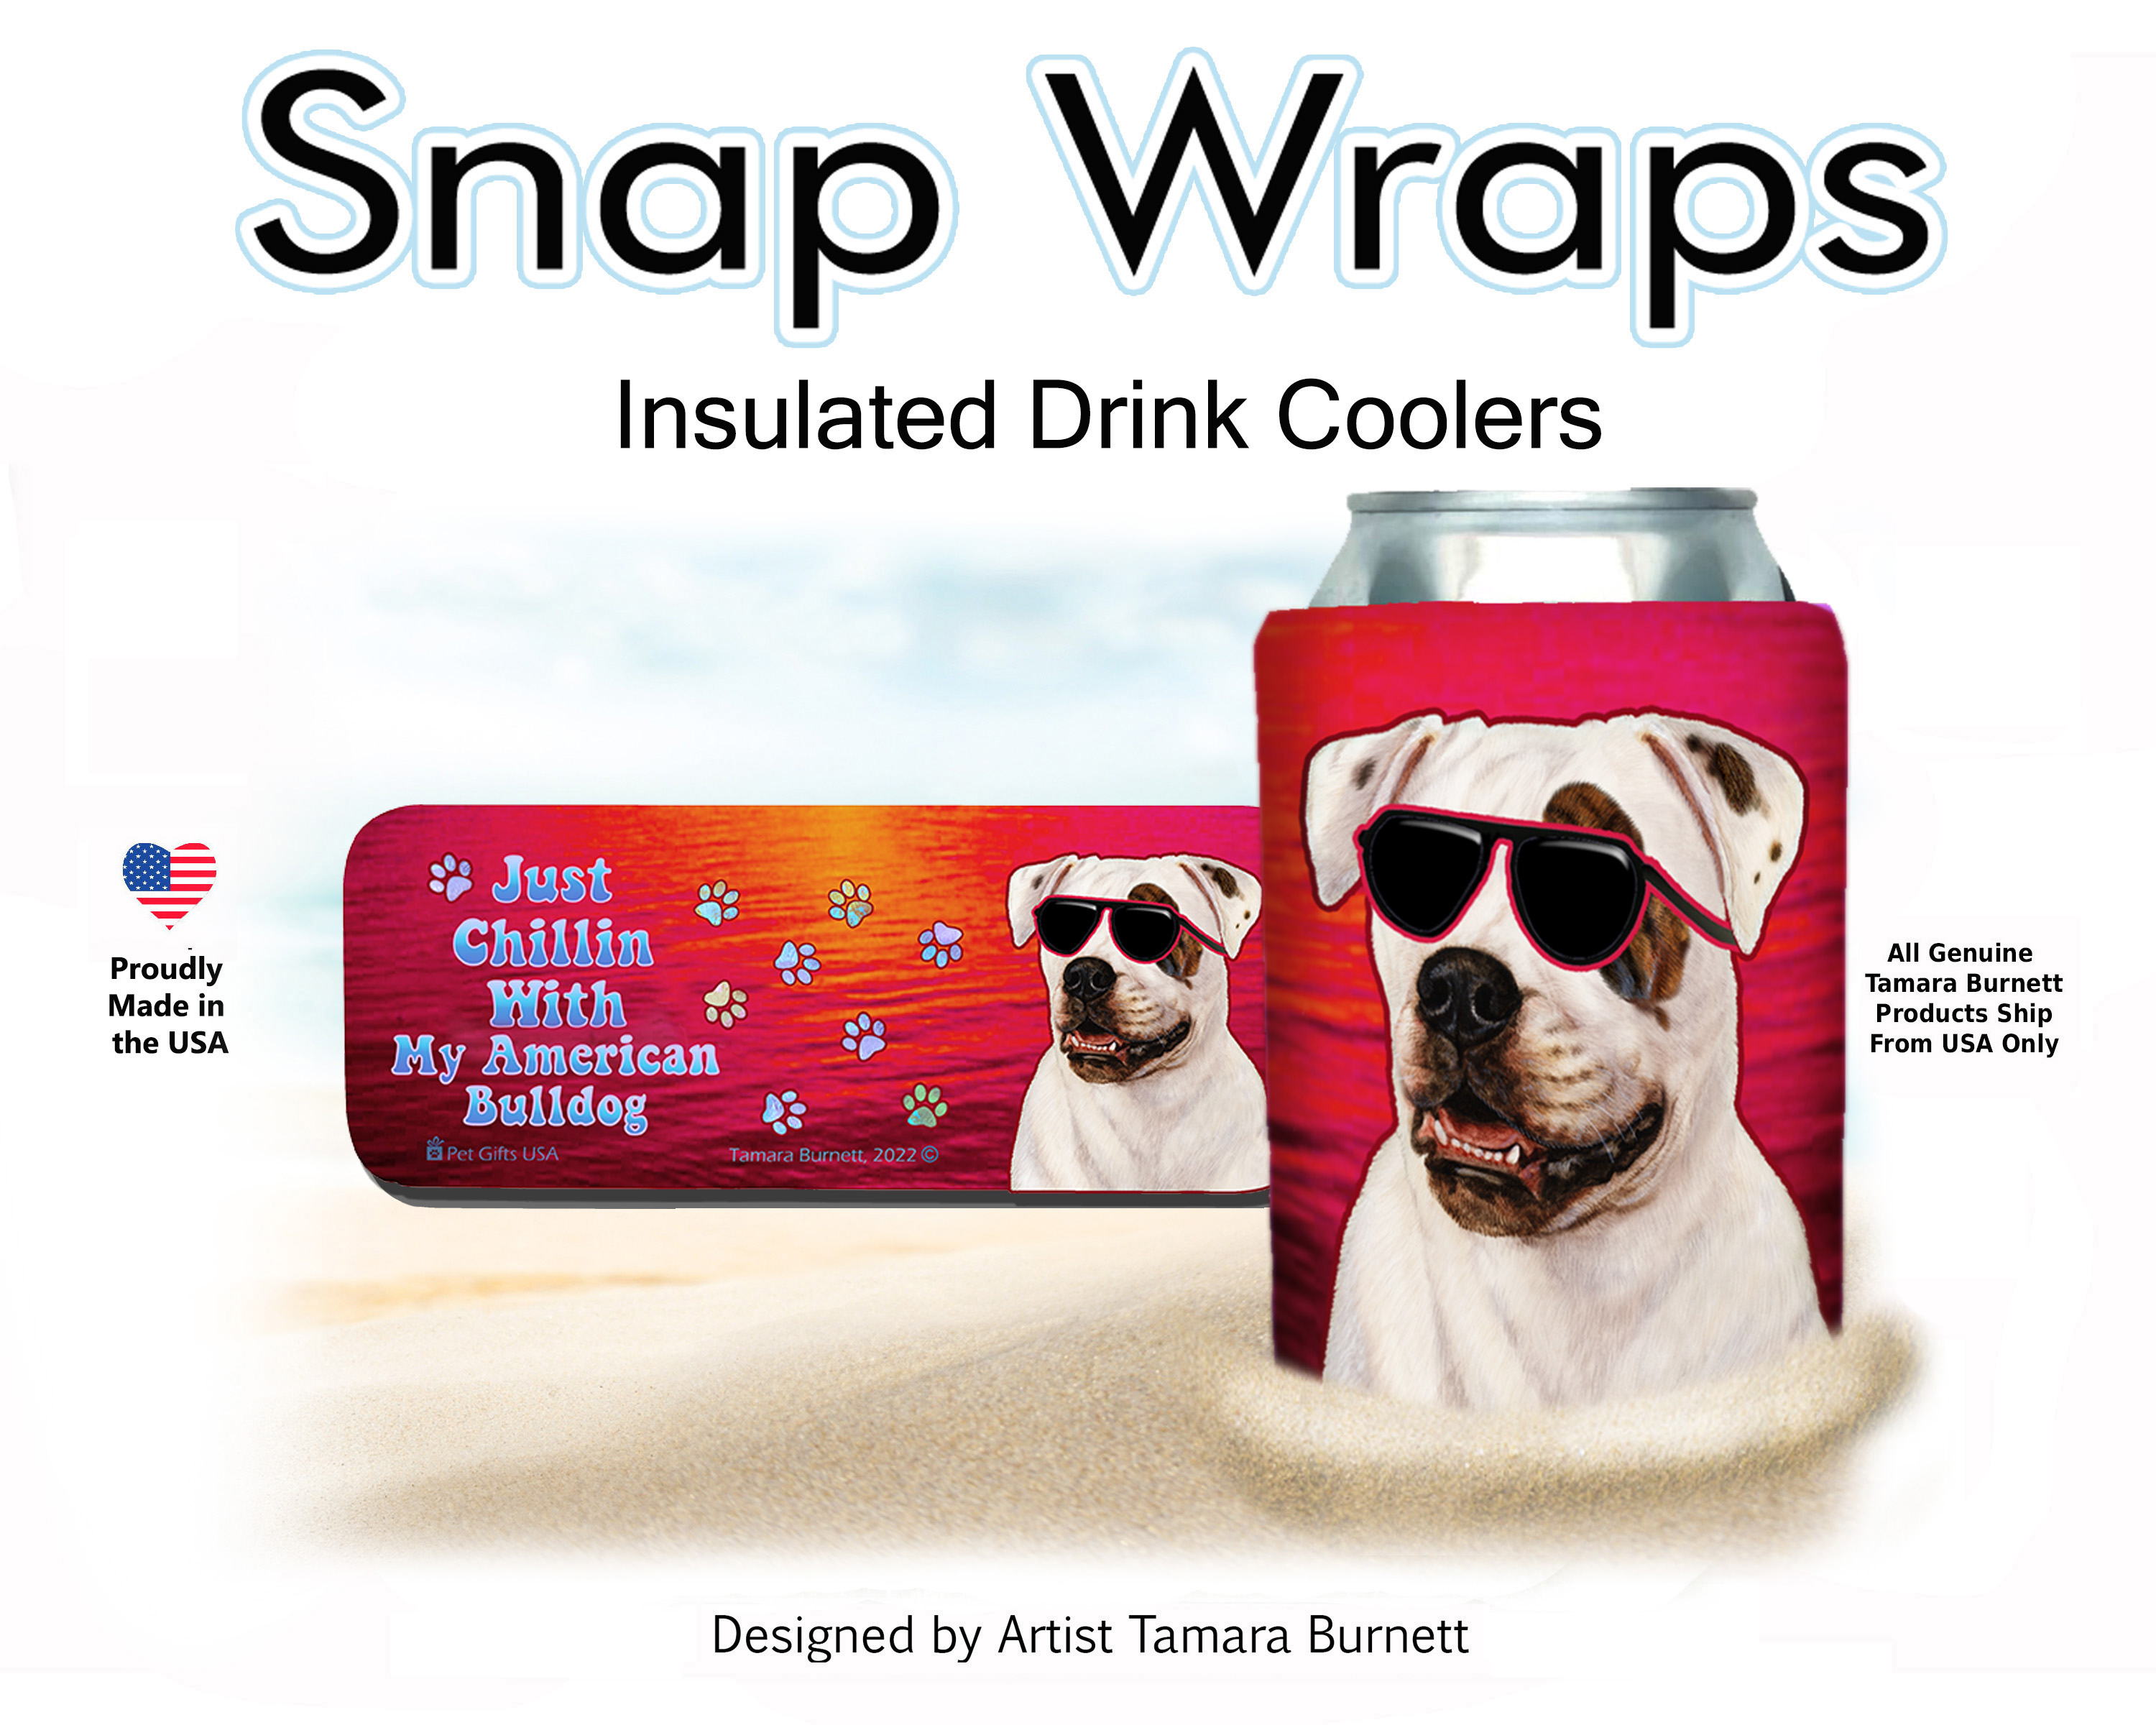 An image of the American Bulldog Brindle Eye Snap Wrap Insulated Drink Holder